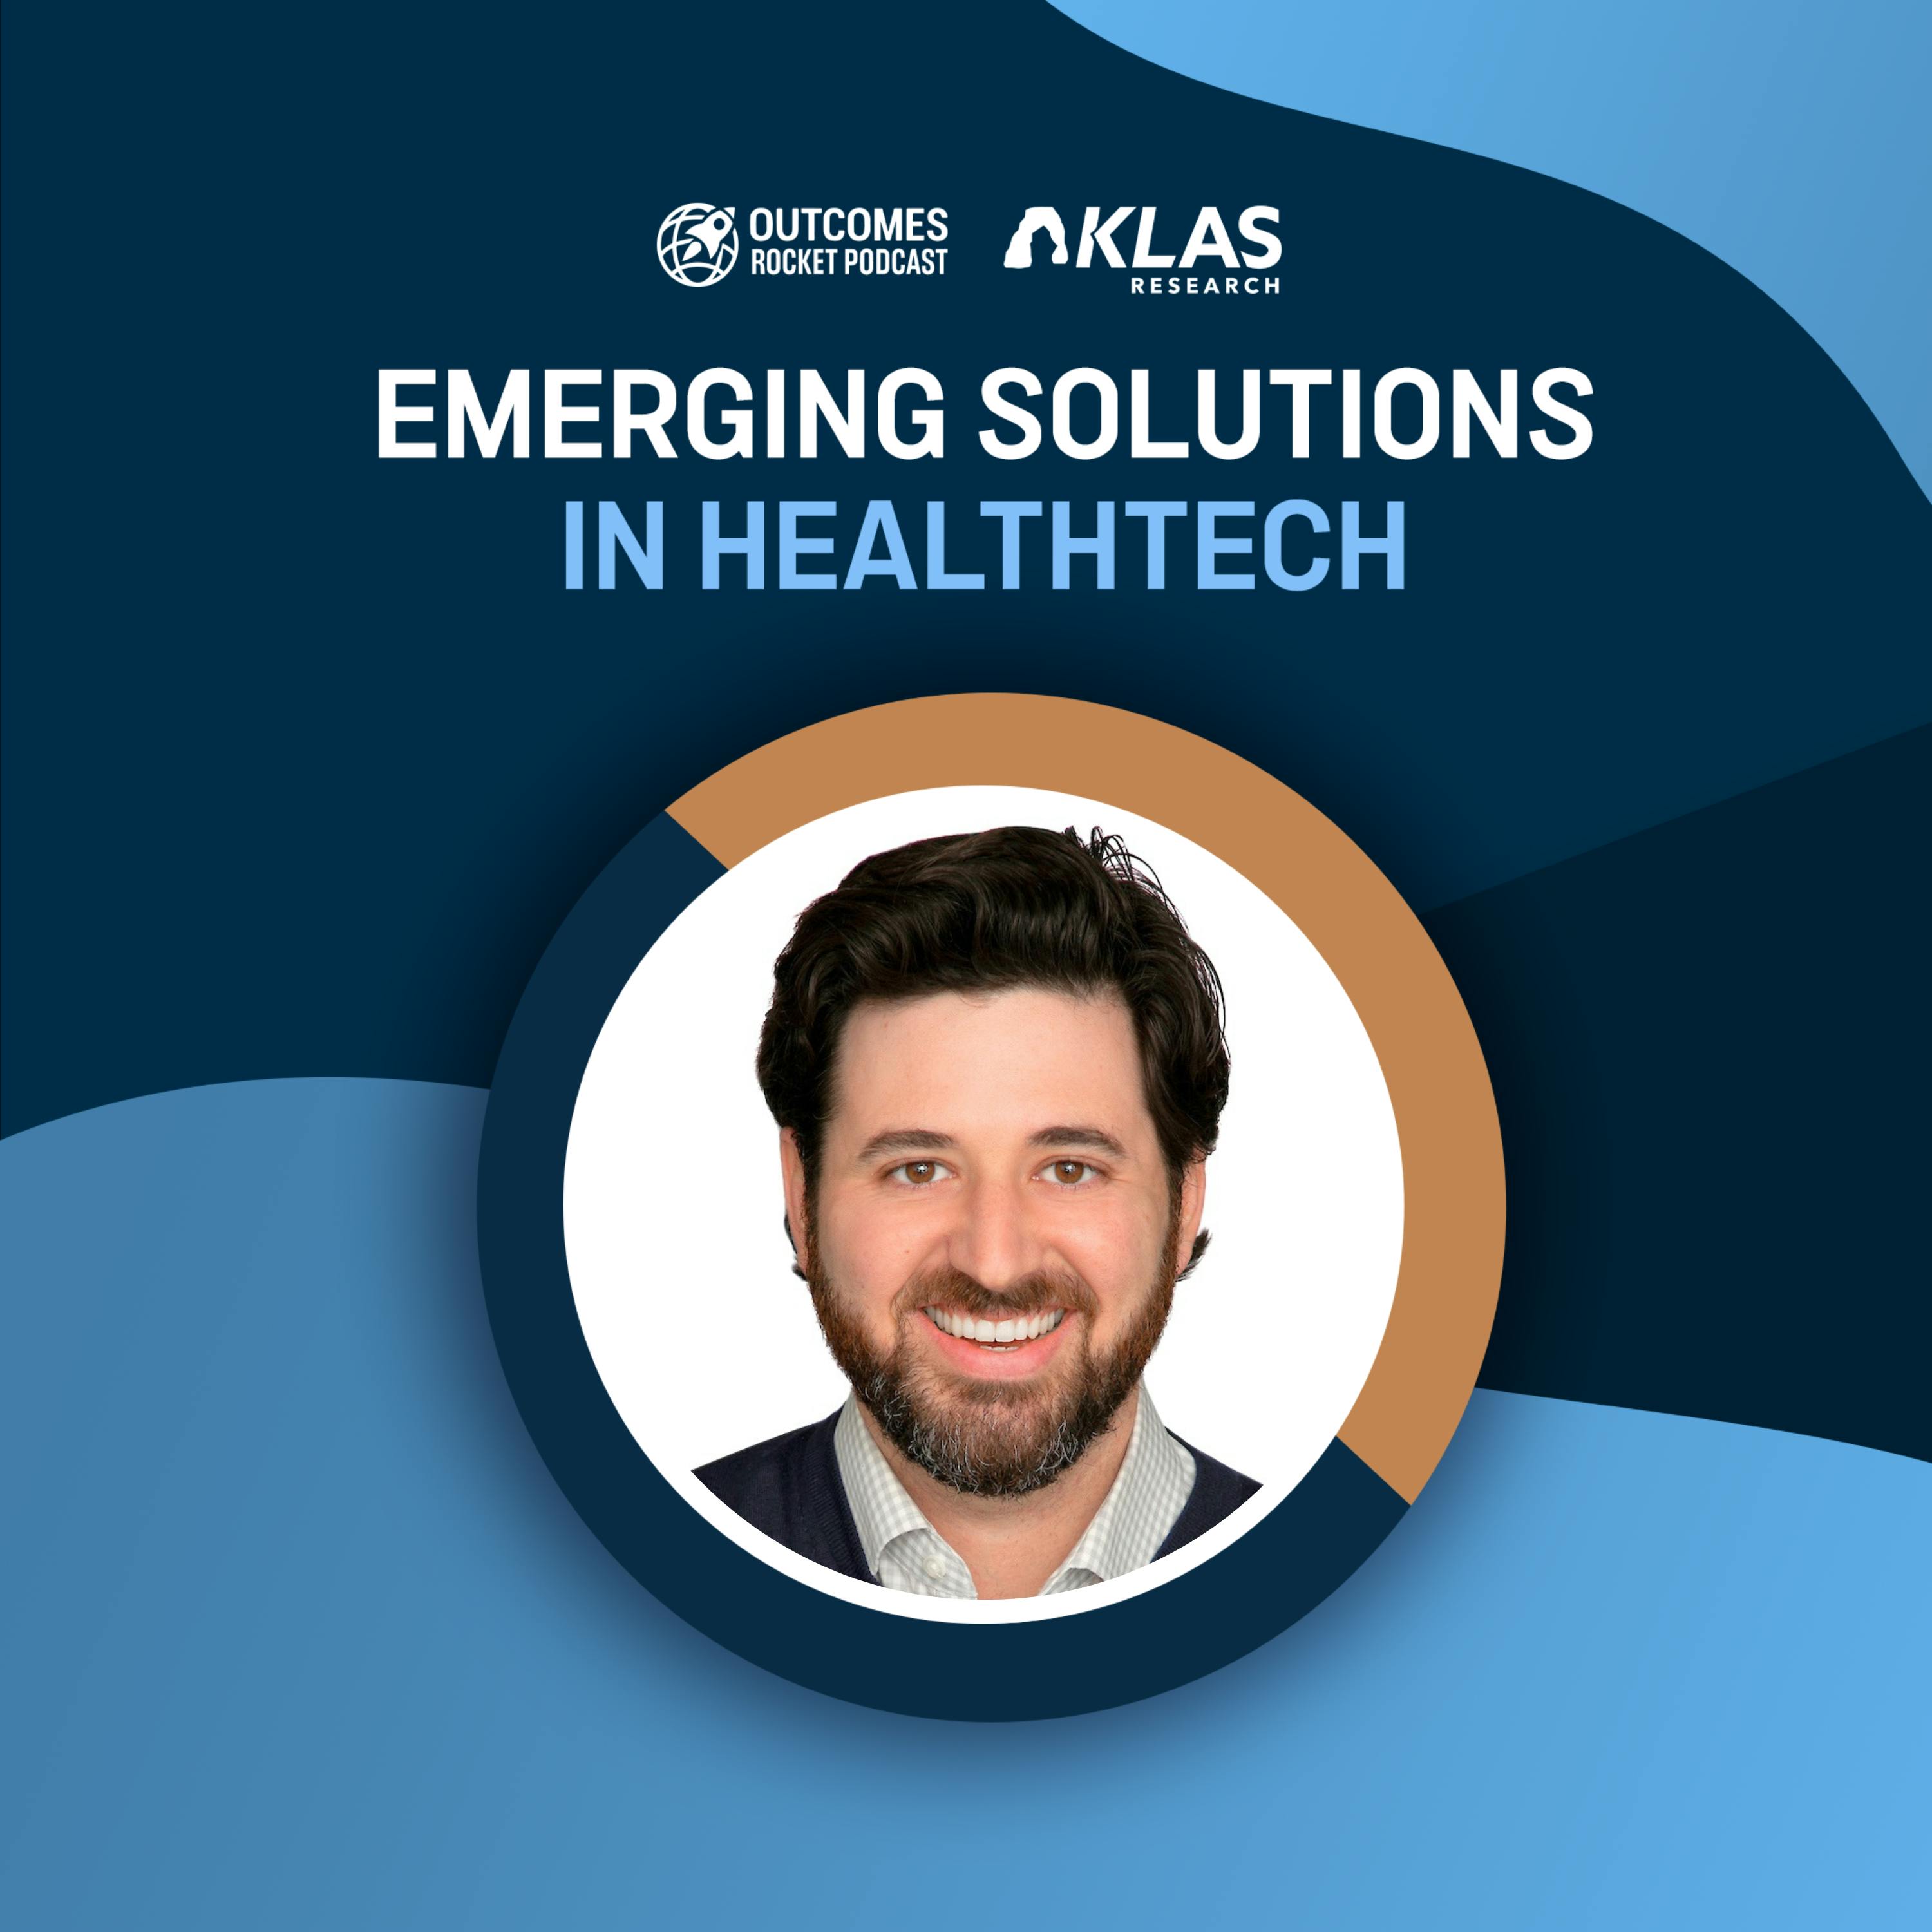 Unlocking Clinical Data to Drive Smarter, More Affordable Healthcare with Dan Wilson, founder and CEO of Moxe Health